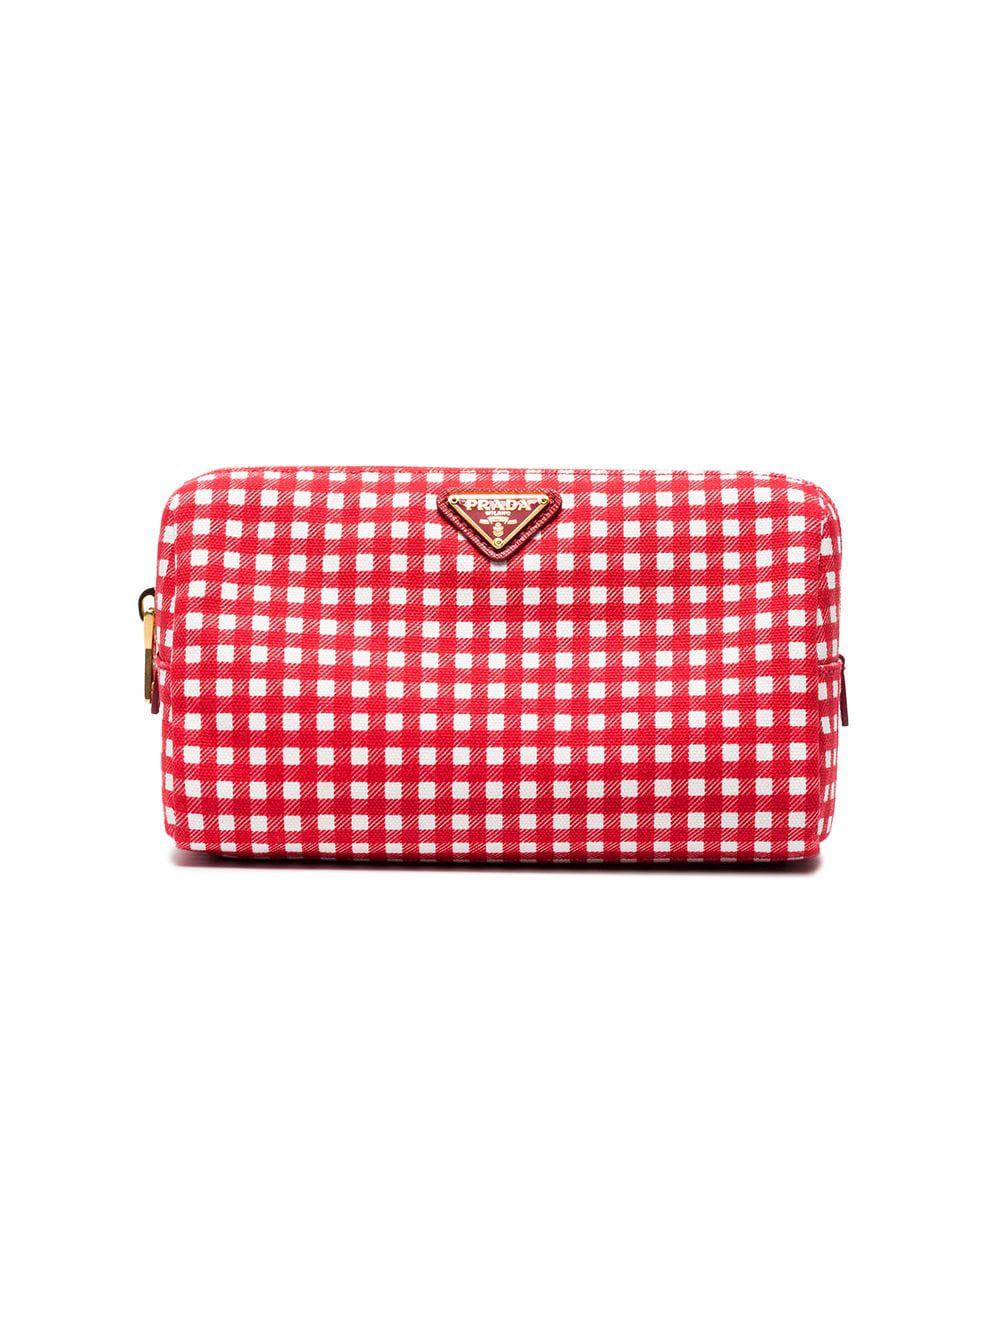 Prada Red Gingham Cotton Makeup Pouch | Lyst